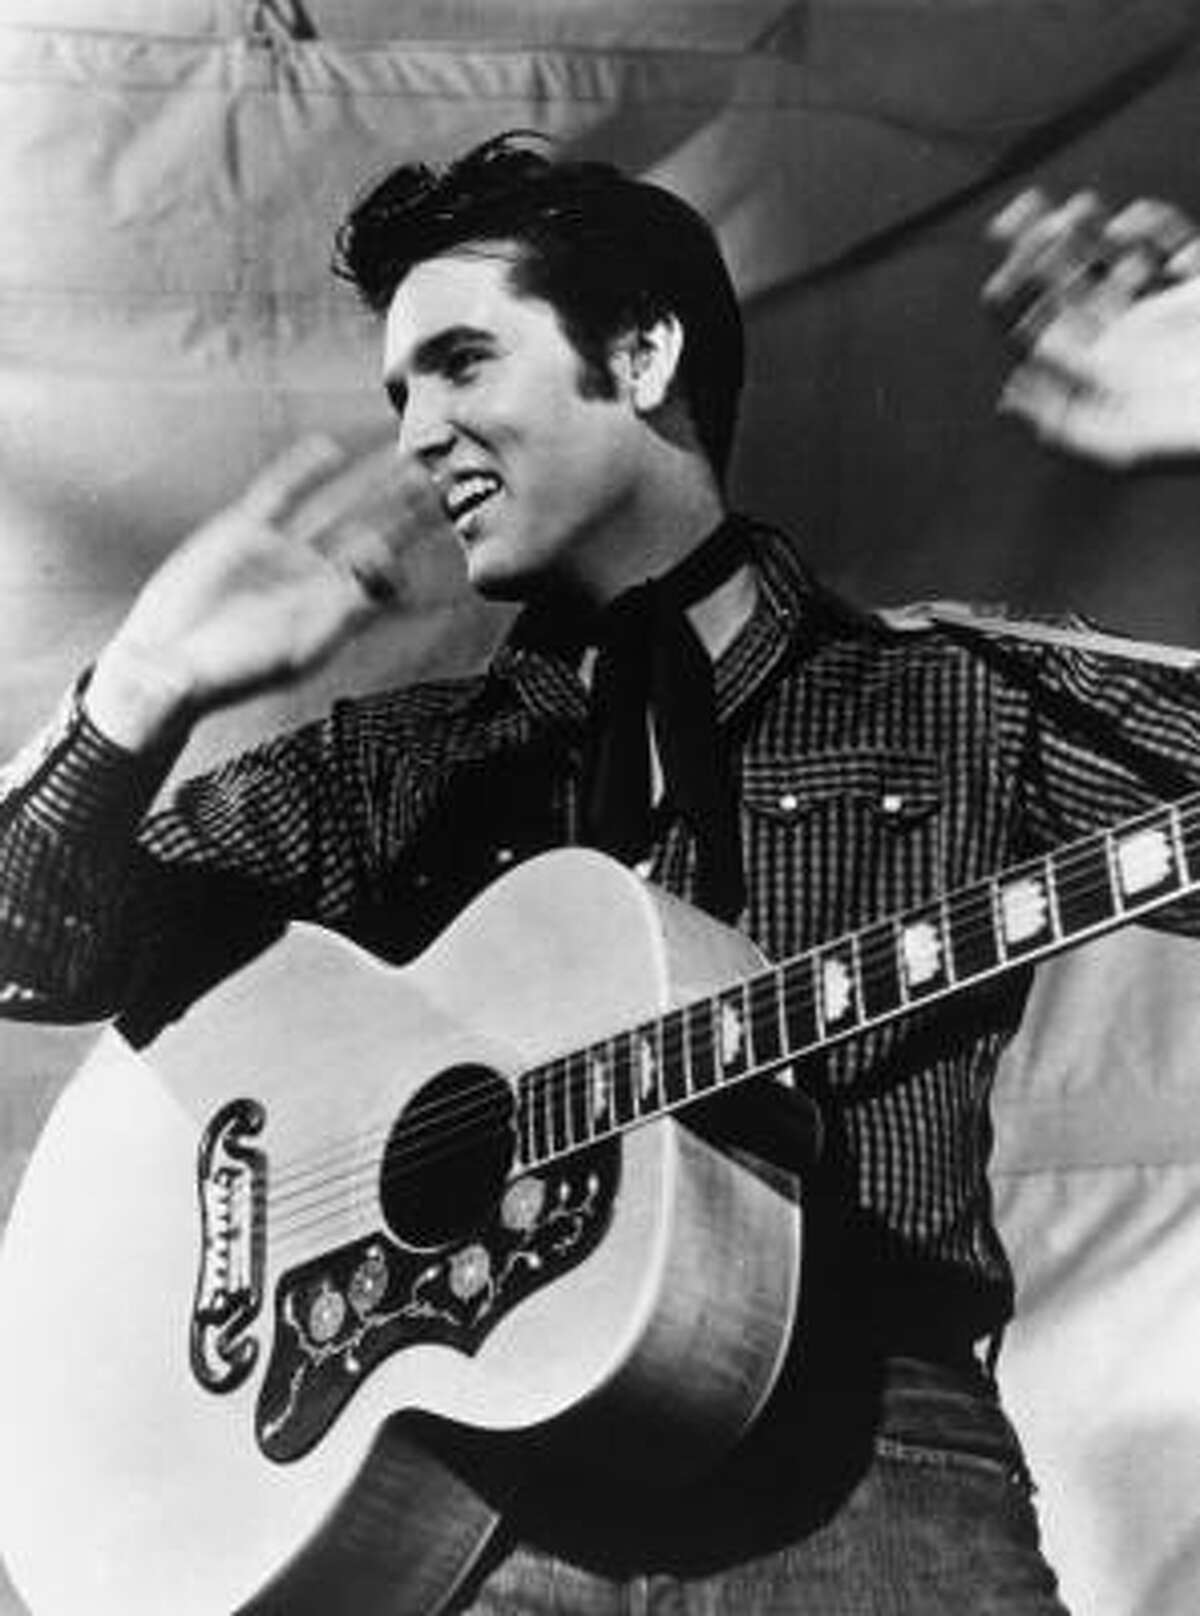 Presley is shown with his Gibson J-200 guitar in 1957.